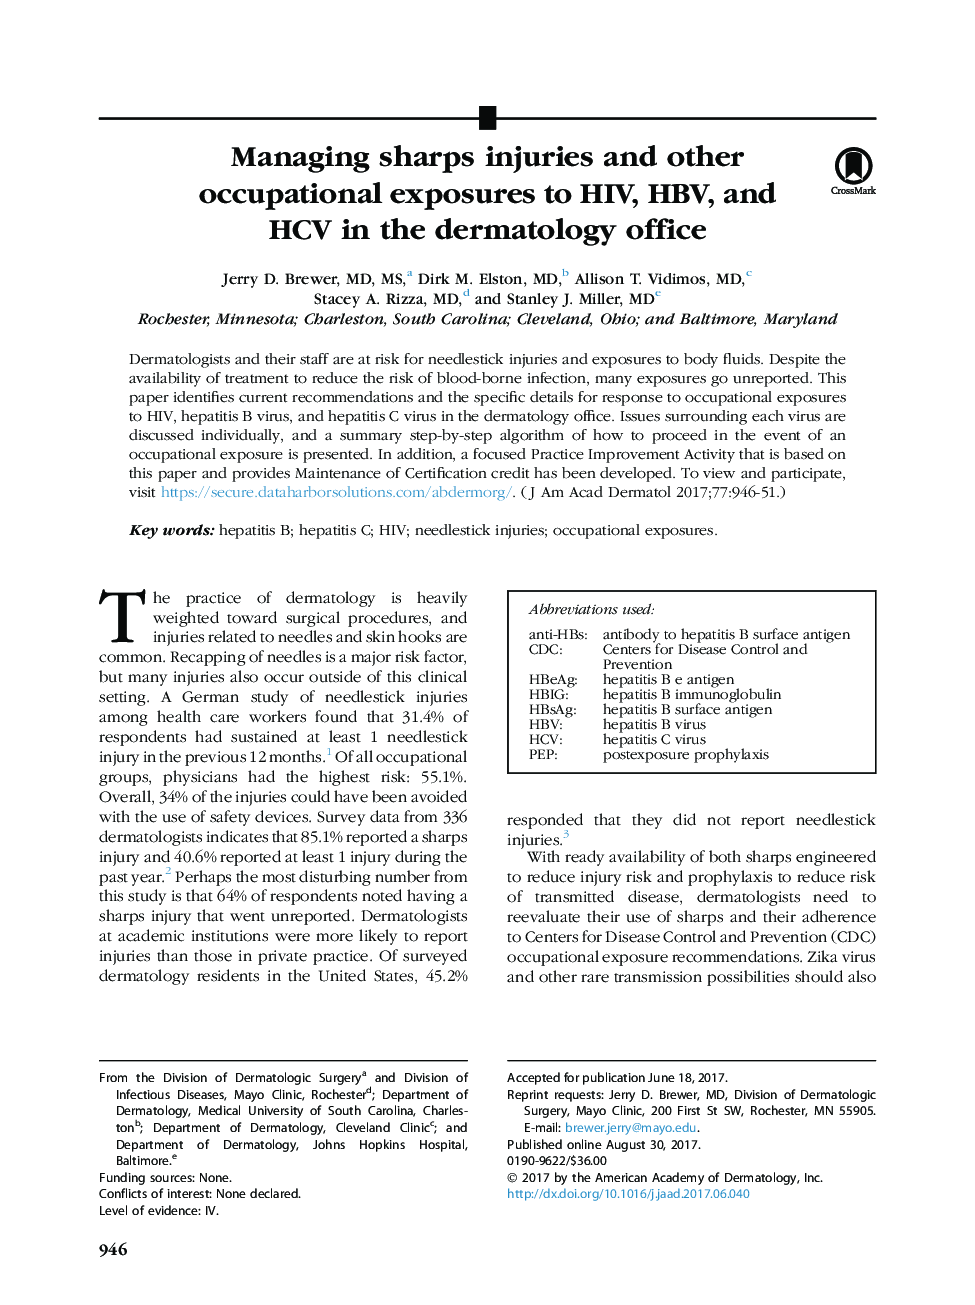 Managing sharps injuries and other occupational exposures to HIV, HBV, and HCV in the dermatology office